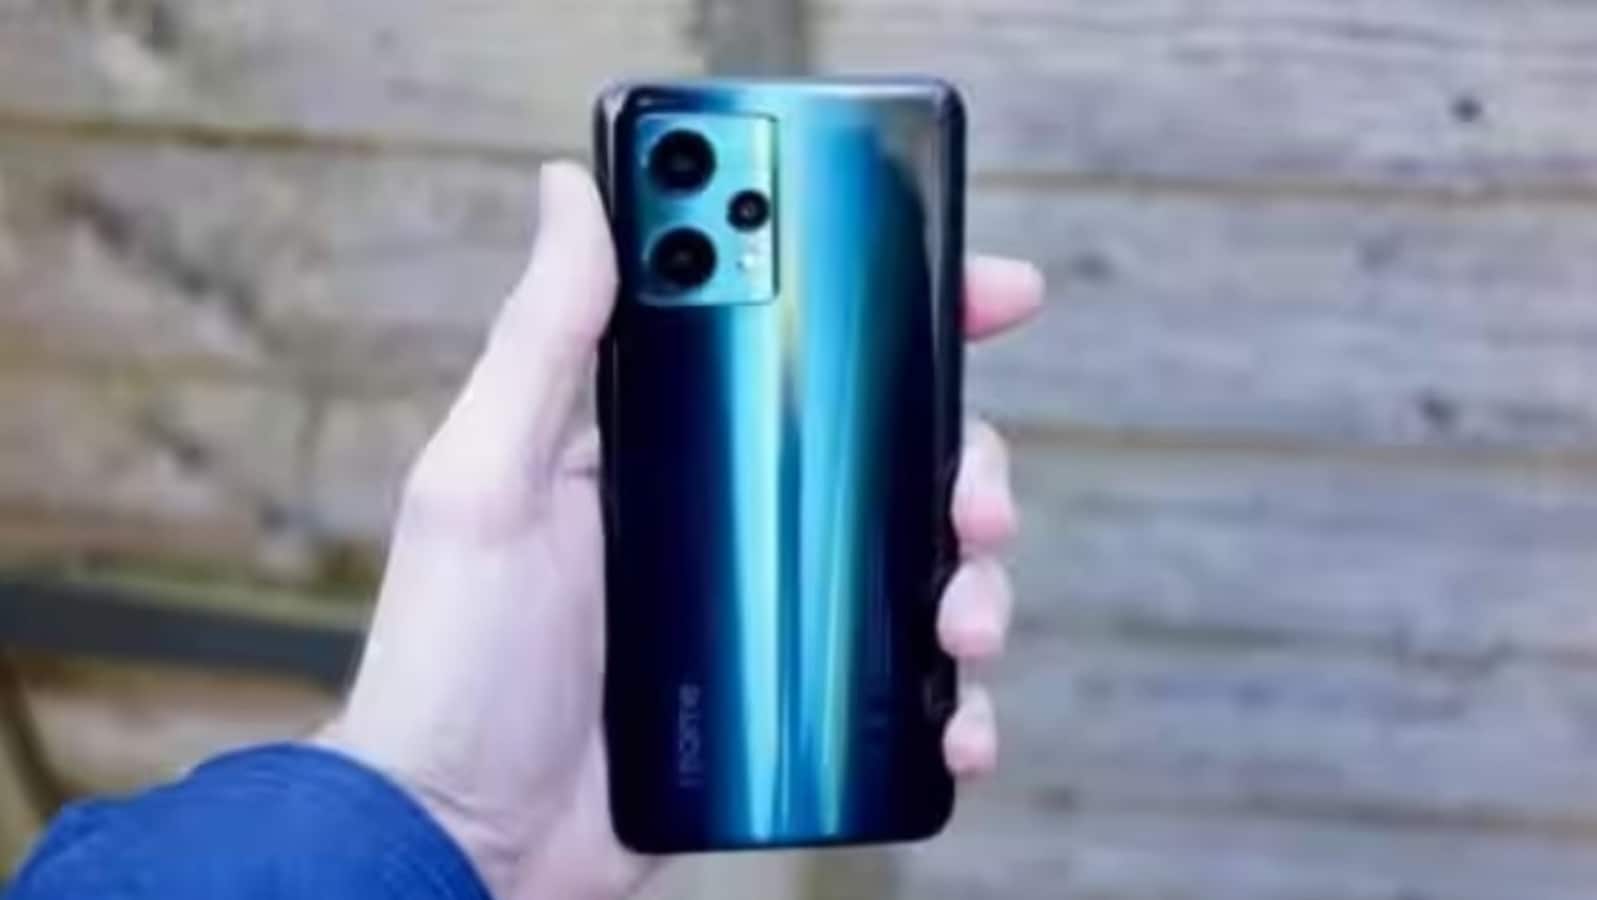 Want to buy a Realme phone? Here’s how much you can save thanks to Flipkart